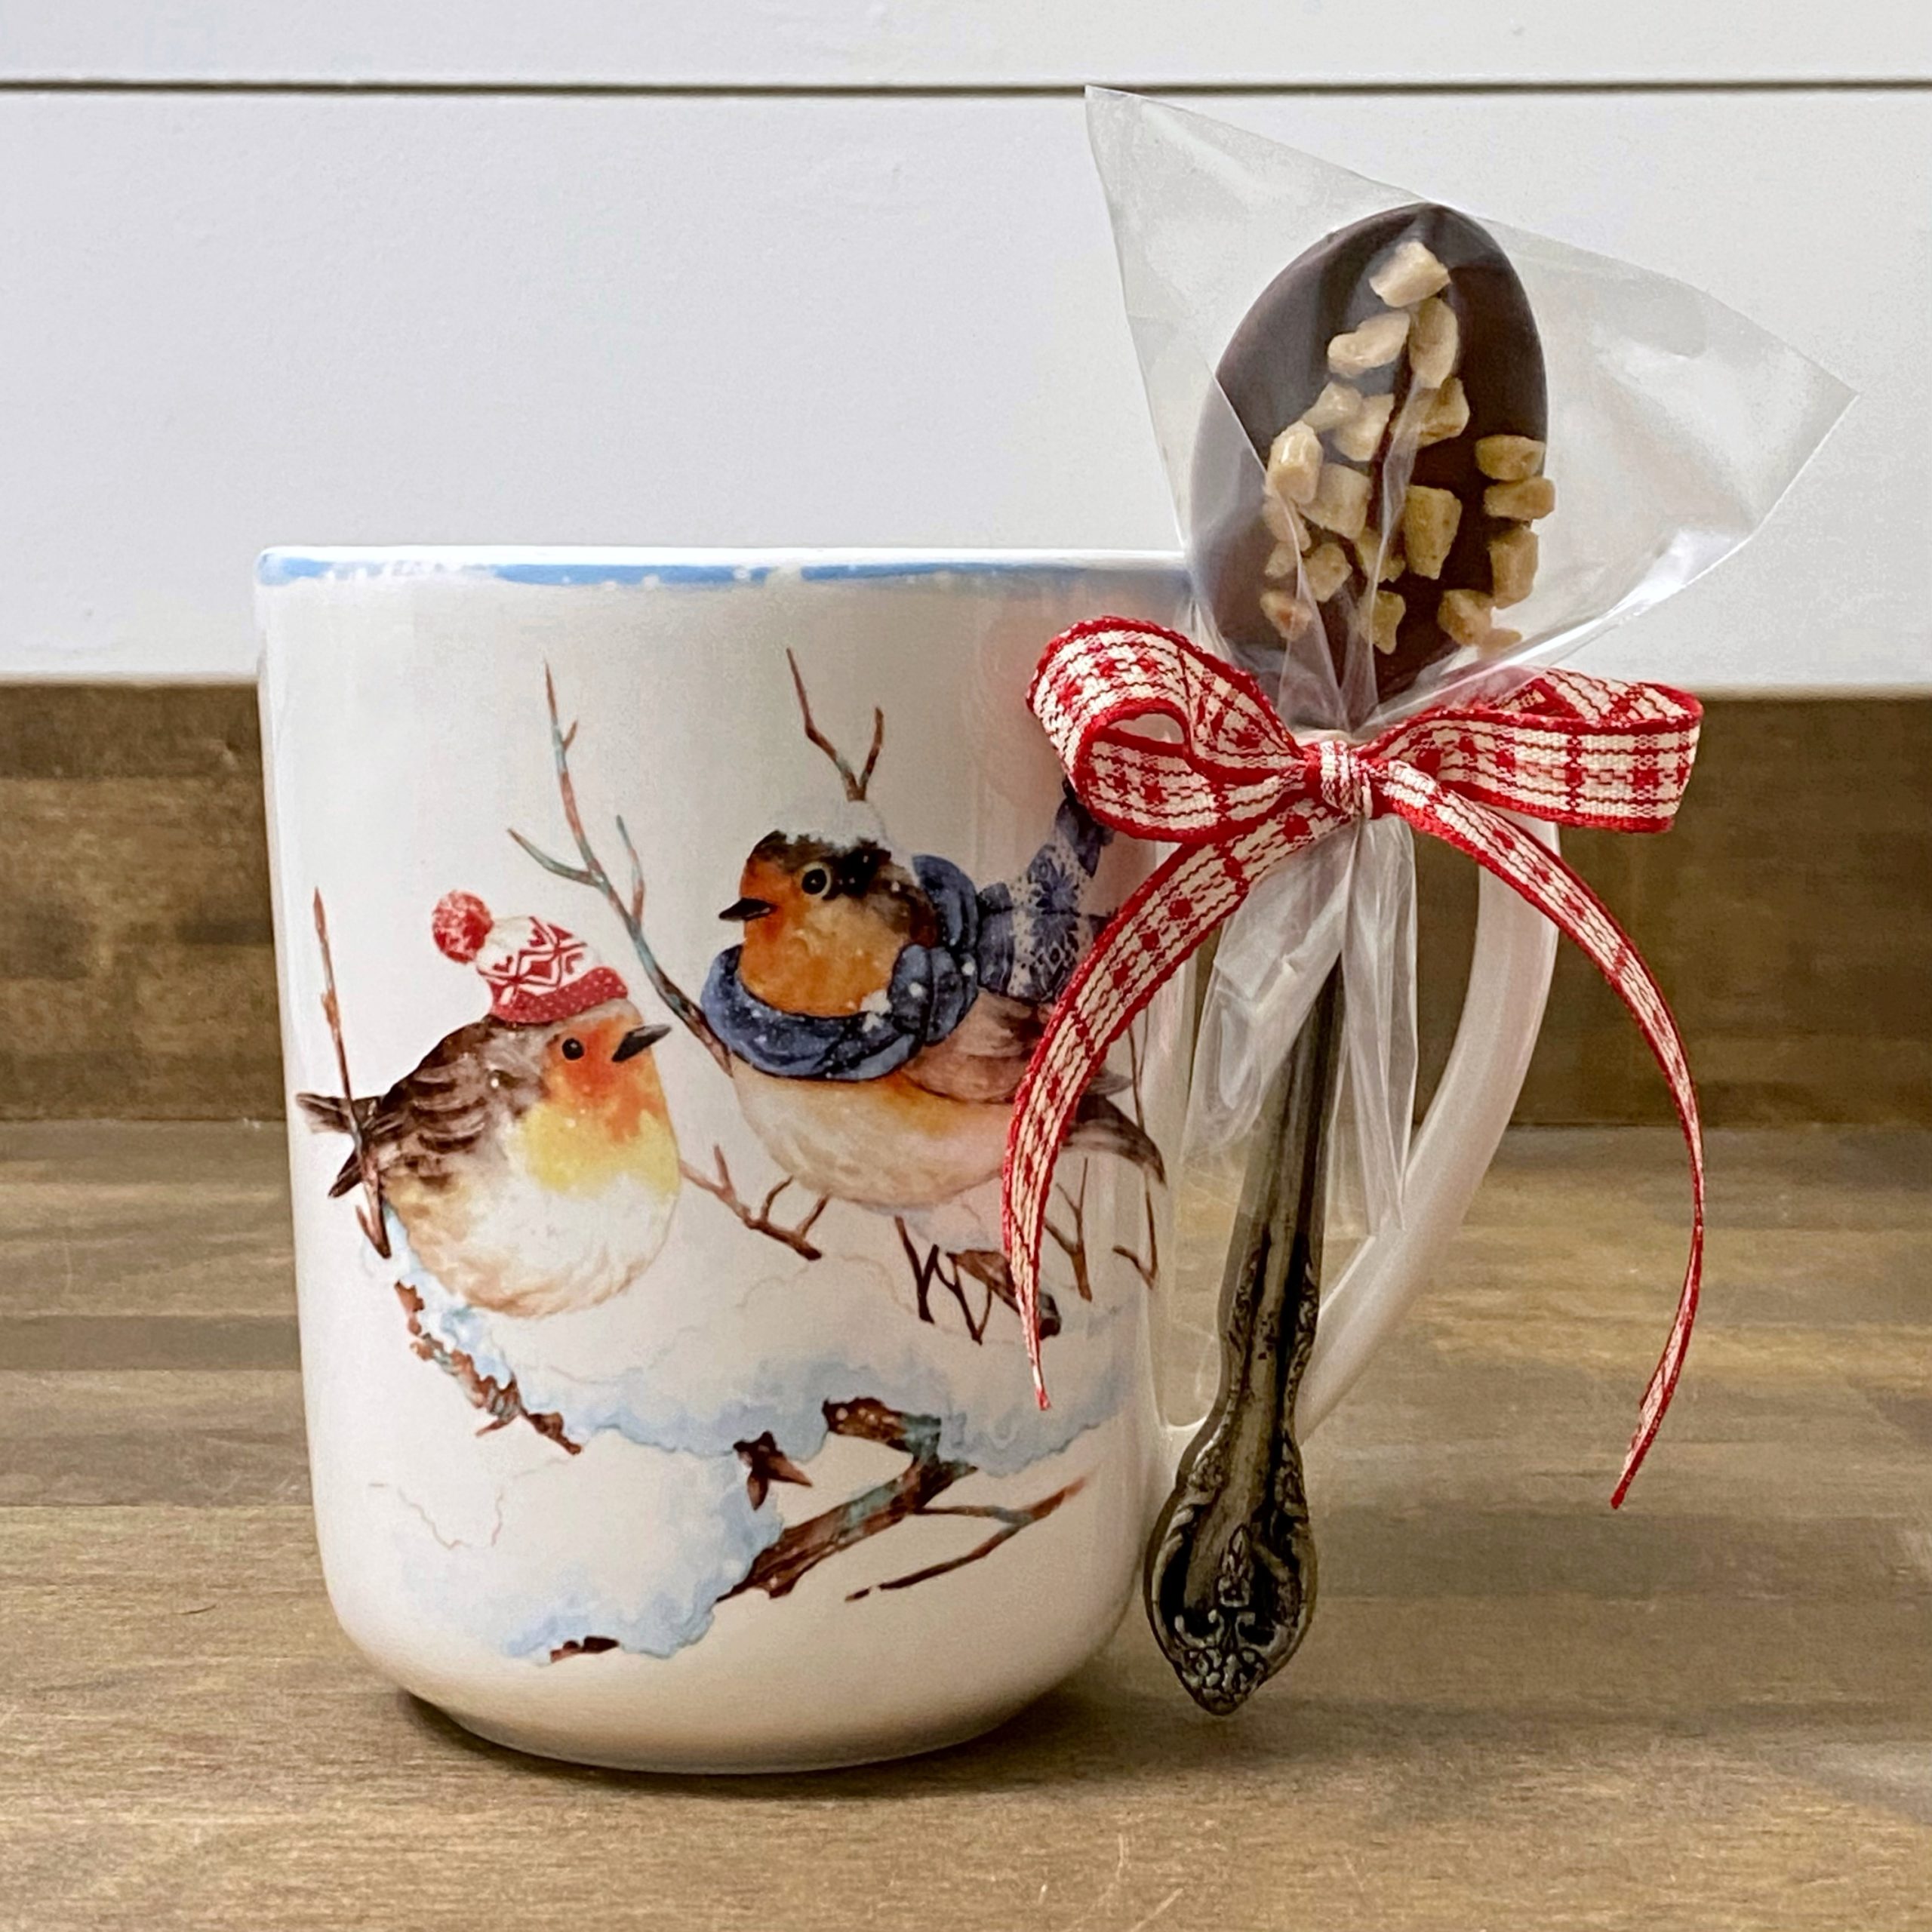 A chocolate dipped spoon tied onto the handle of a mug with winter birds on it.